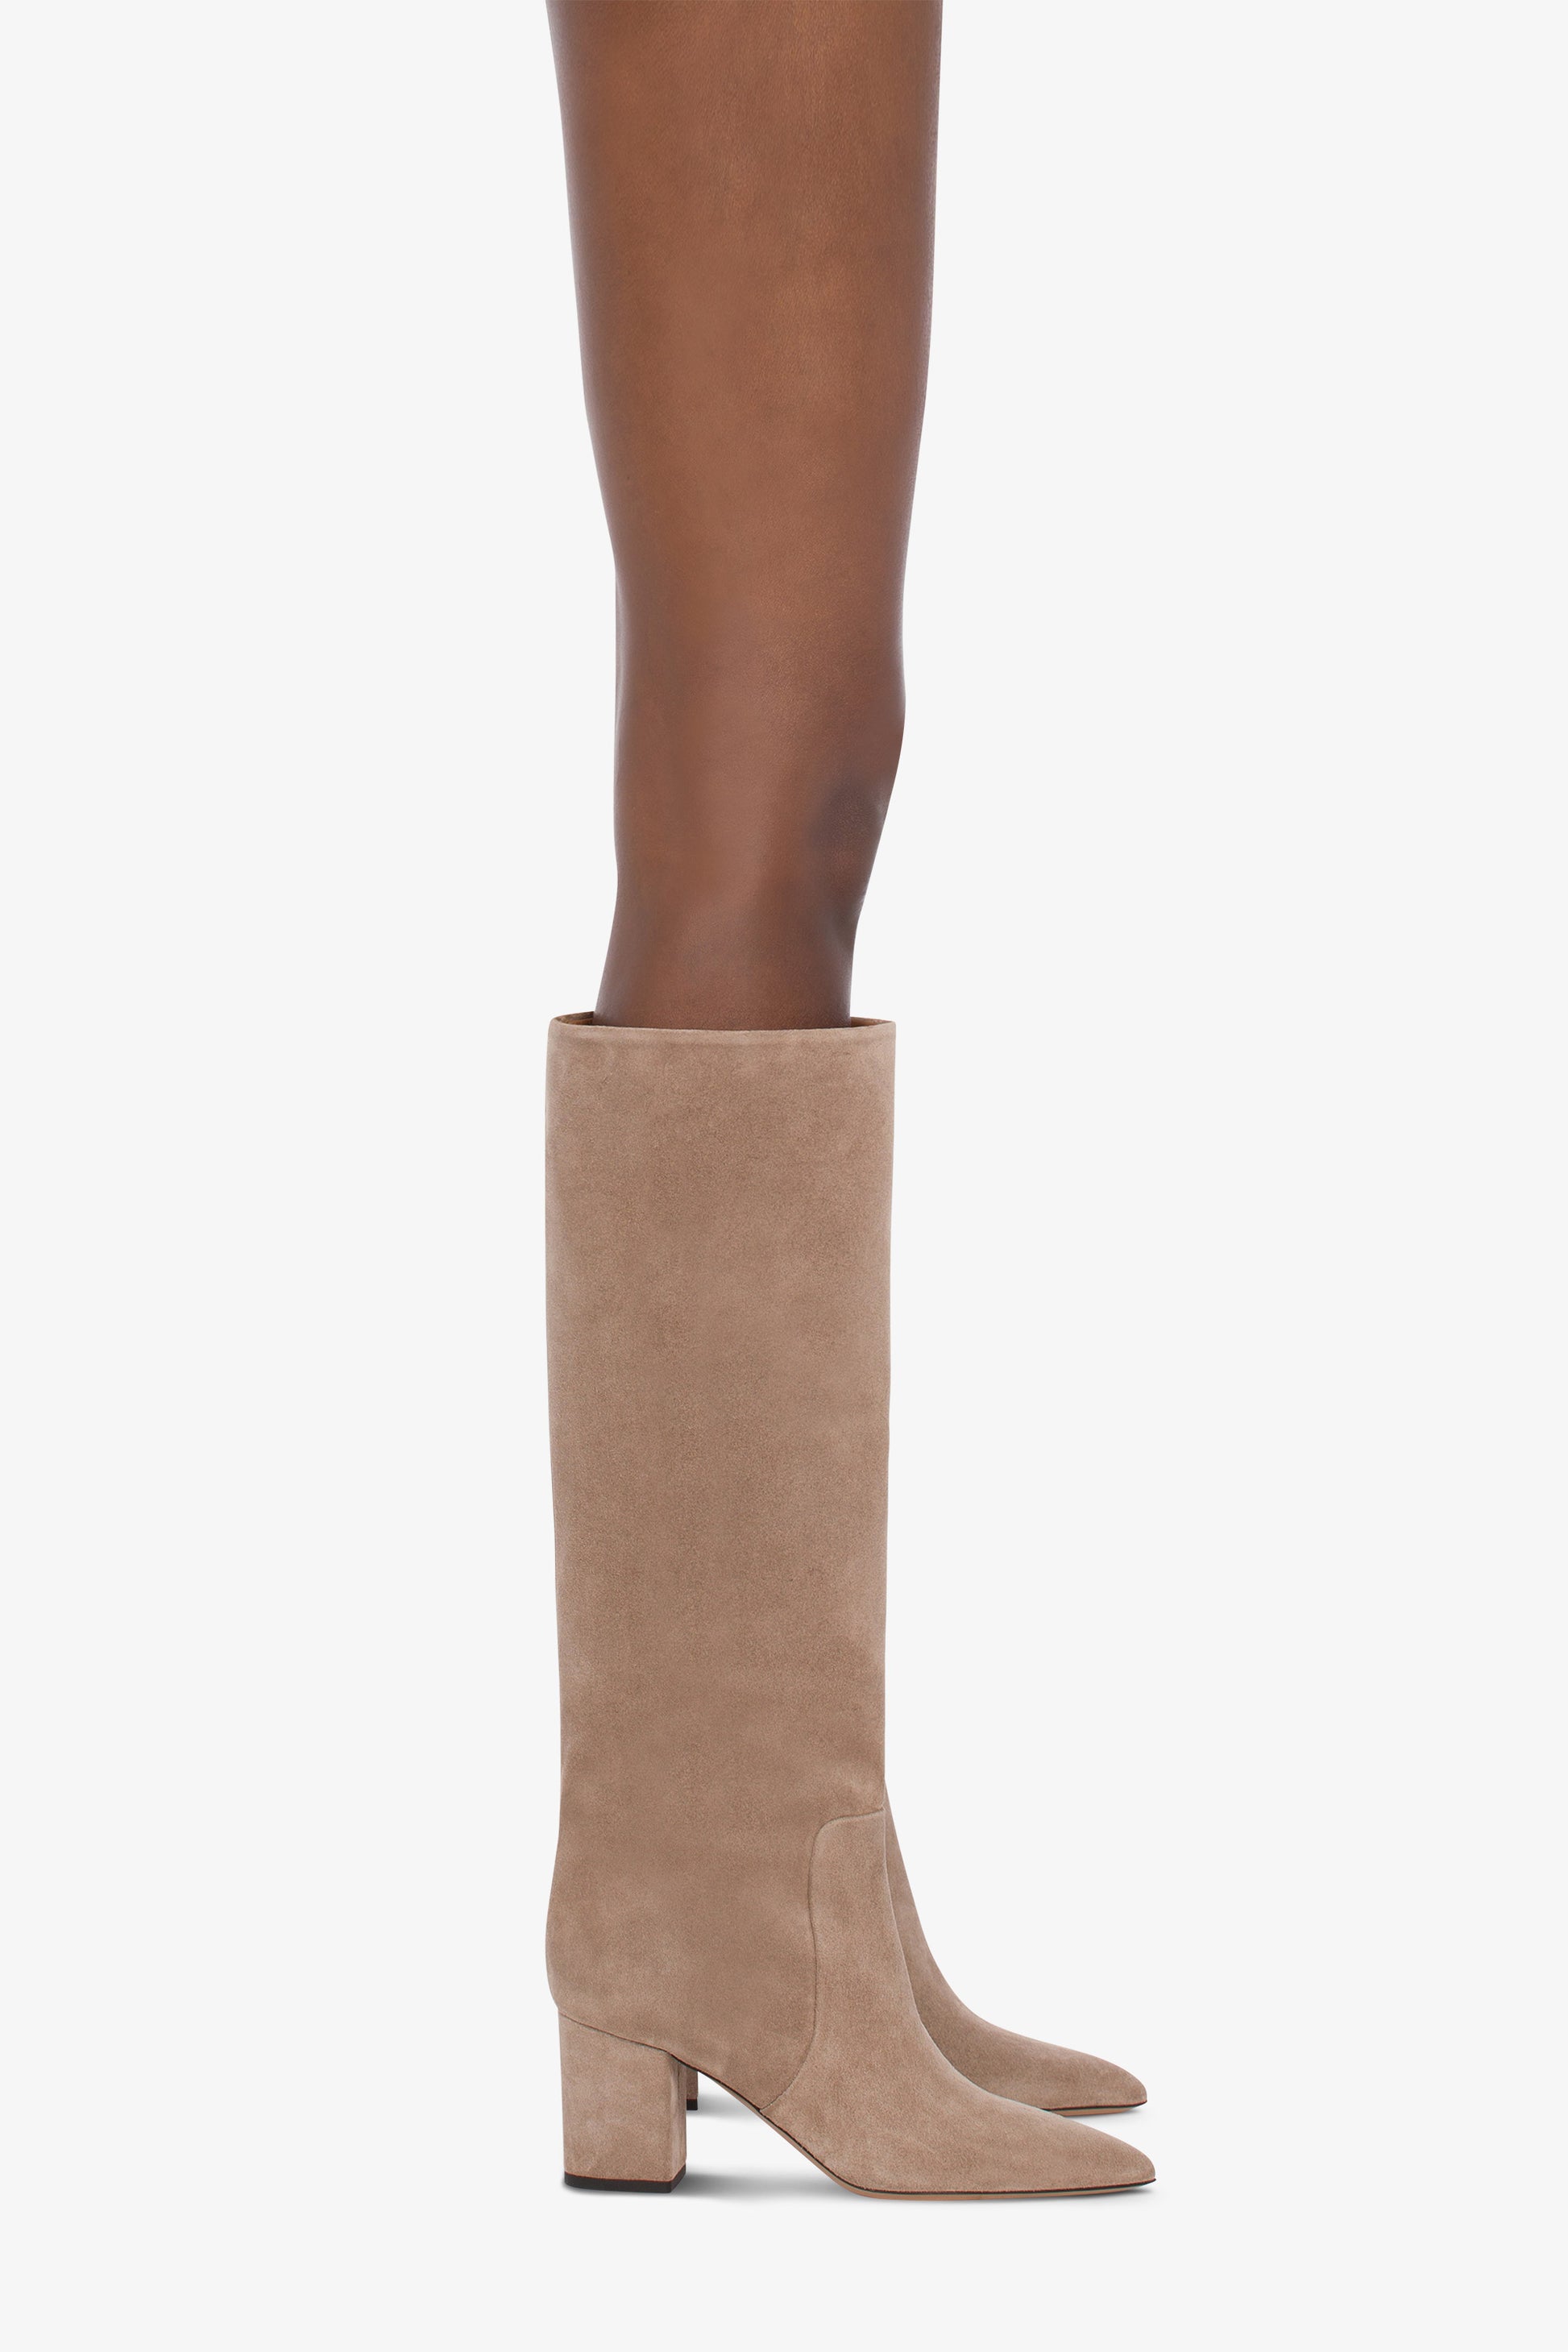 Knee-high boots in soft koala suede leather - Producto usado